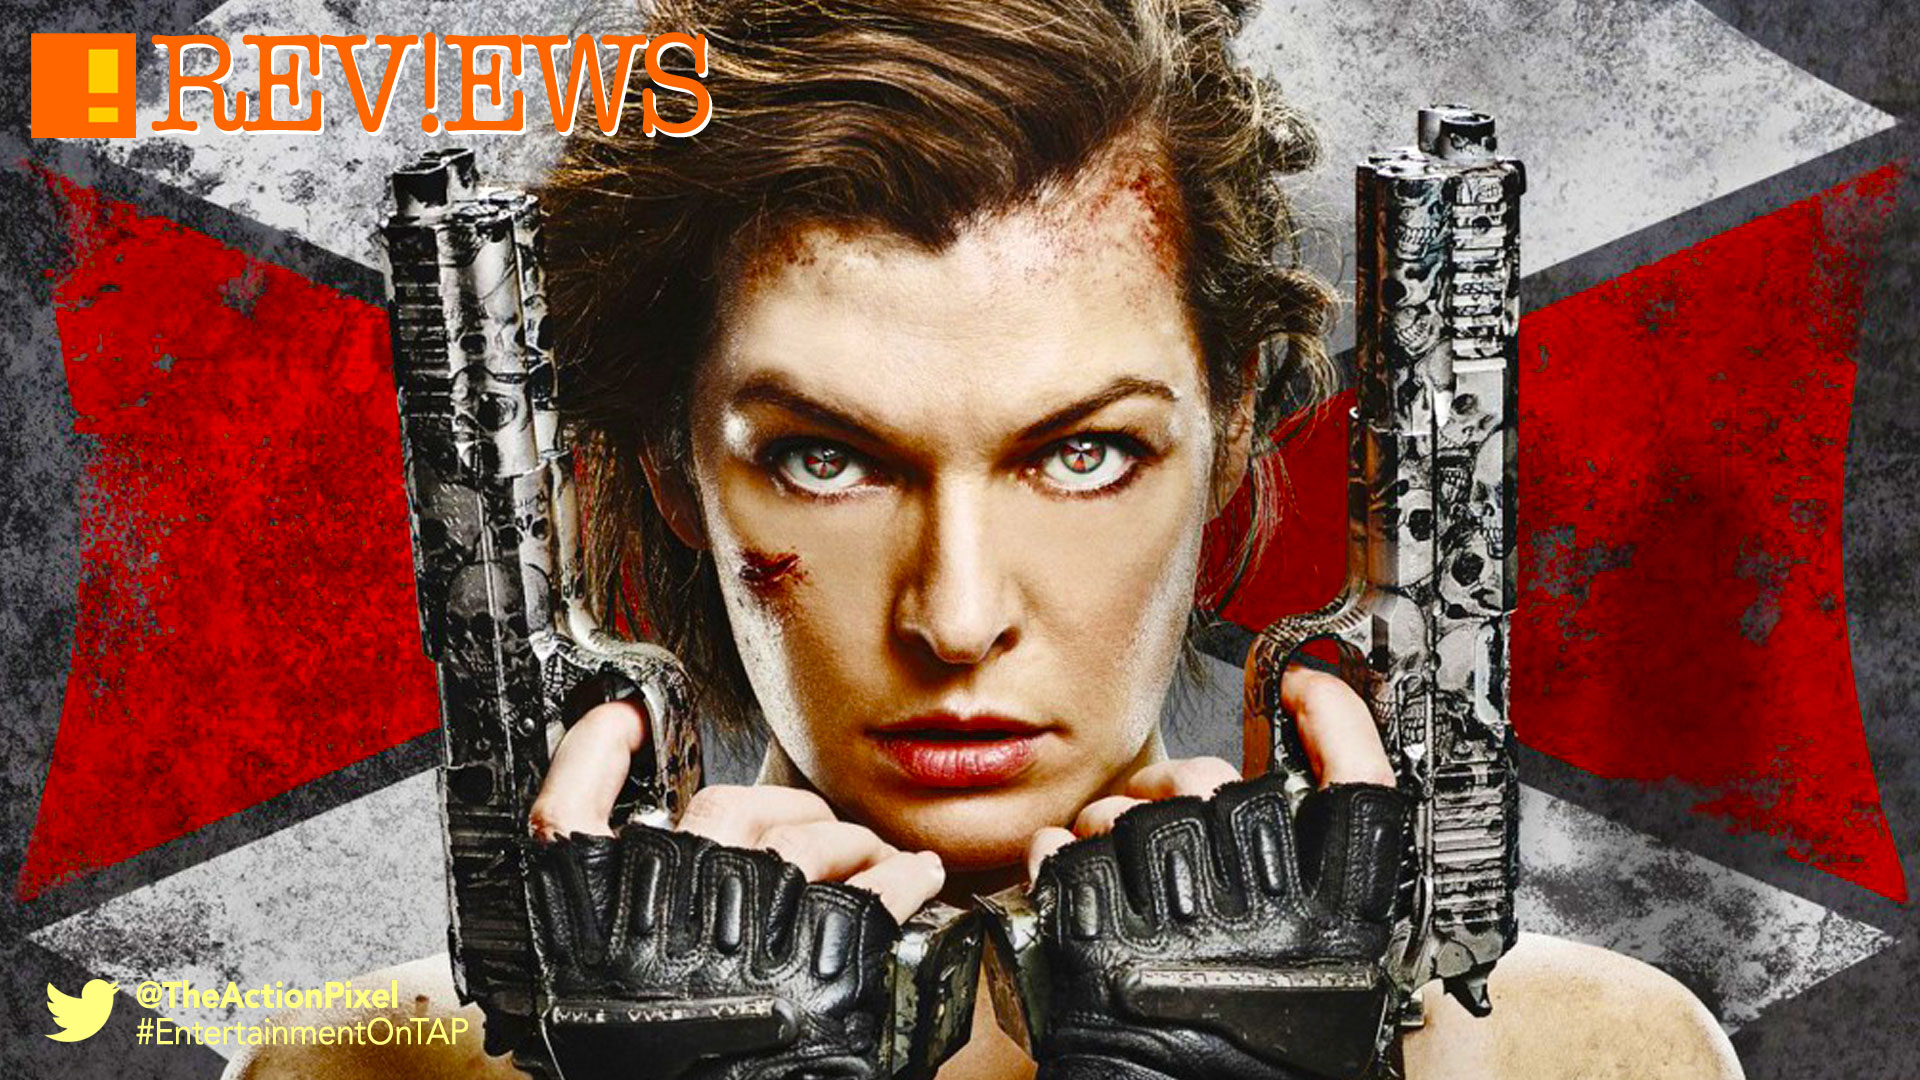 Feast On The New Trailer For 'Resident Evil: The Final Chapter!